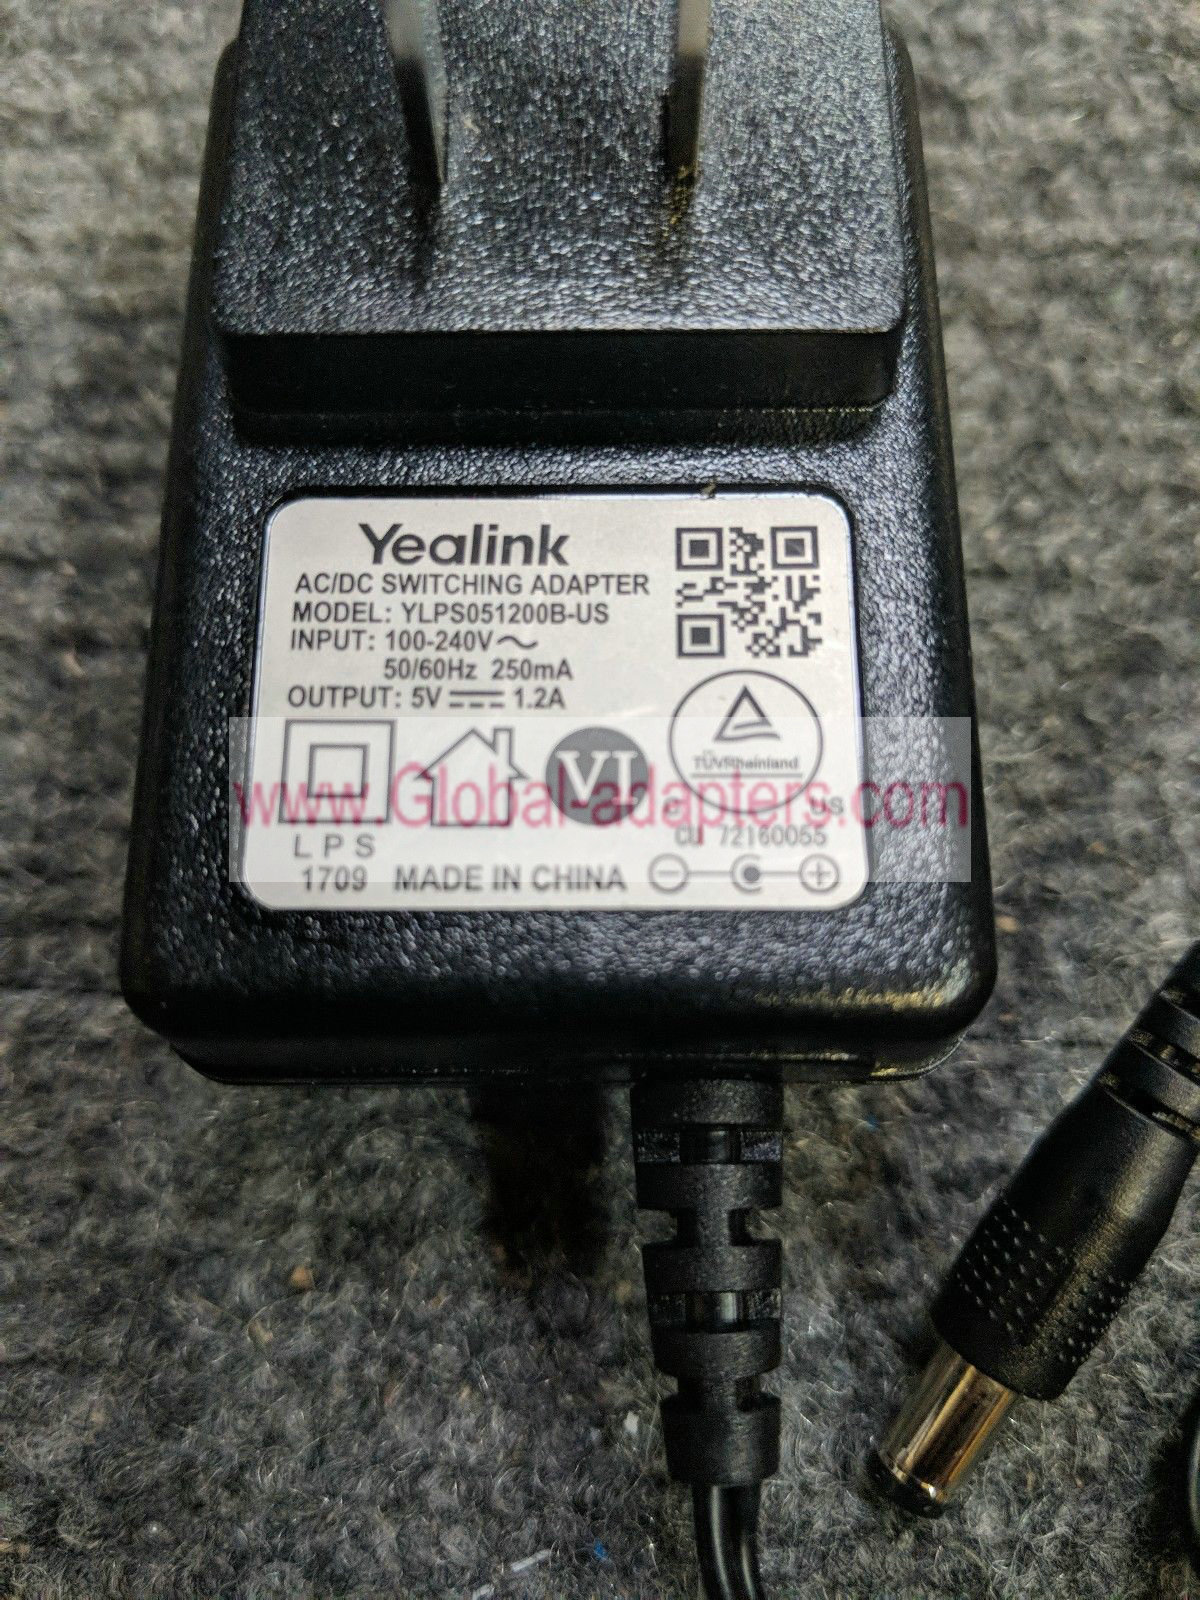 Brand new Yealink 5V 1.2A YLPS051200B-US Switching Power Adapter - Click Image to Close